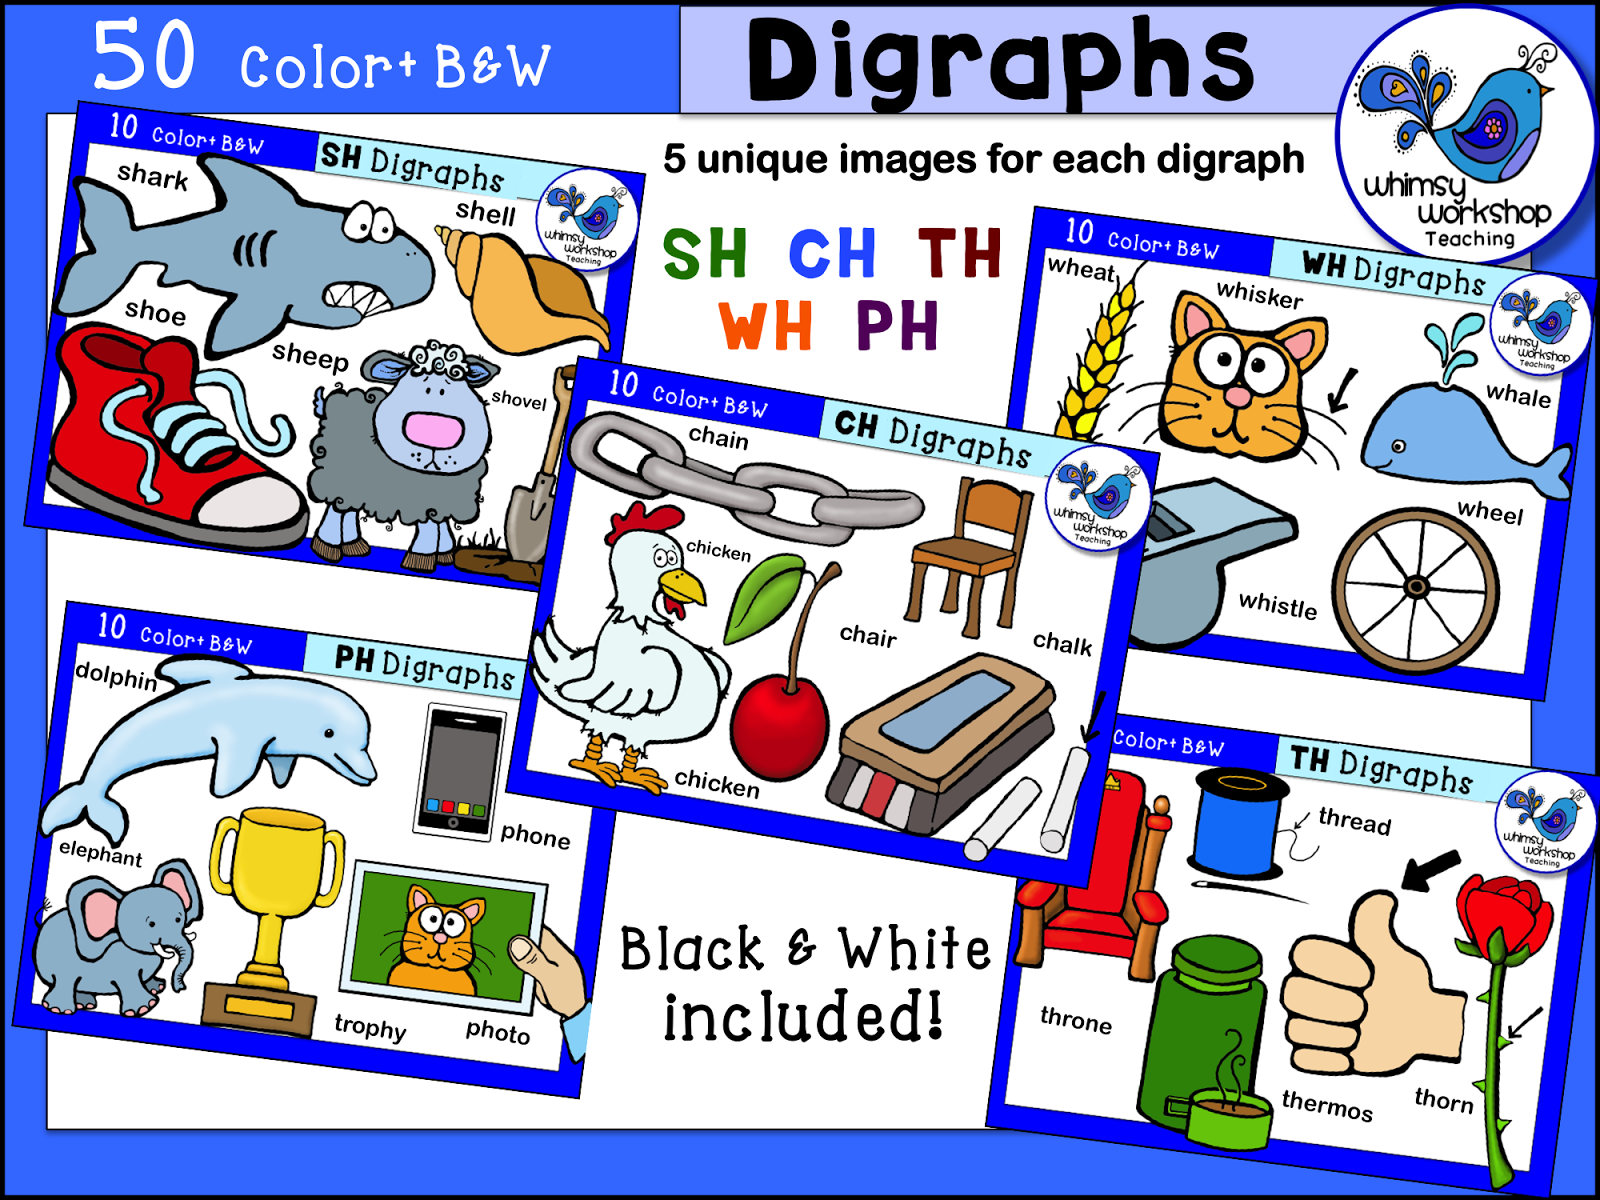 Digraphs Beginning Sounds Bundle Features Sets For Sh Ch Ph Wh Th